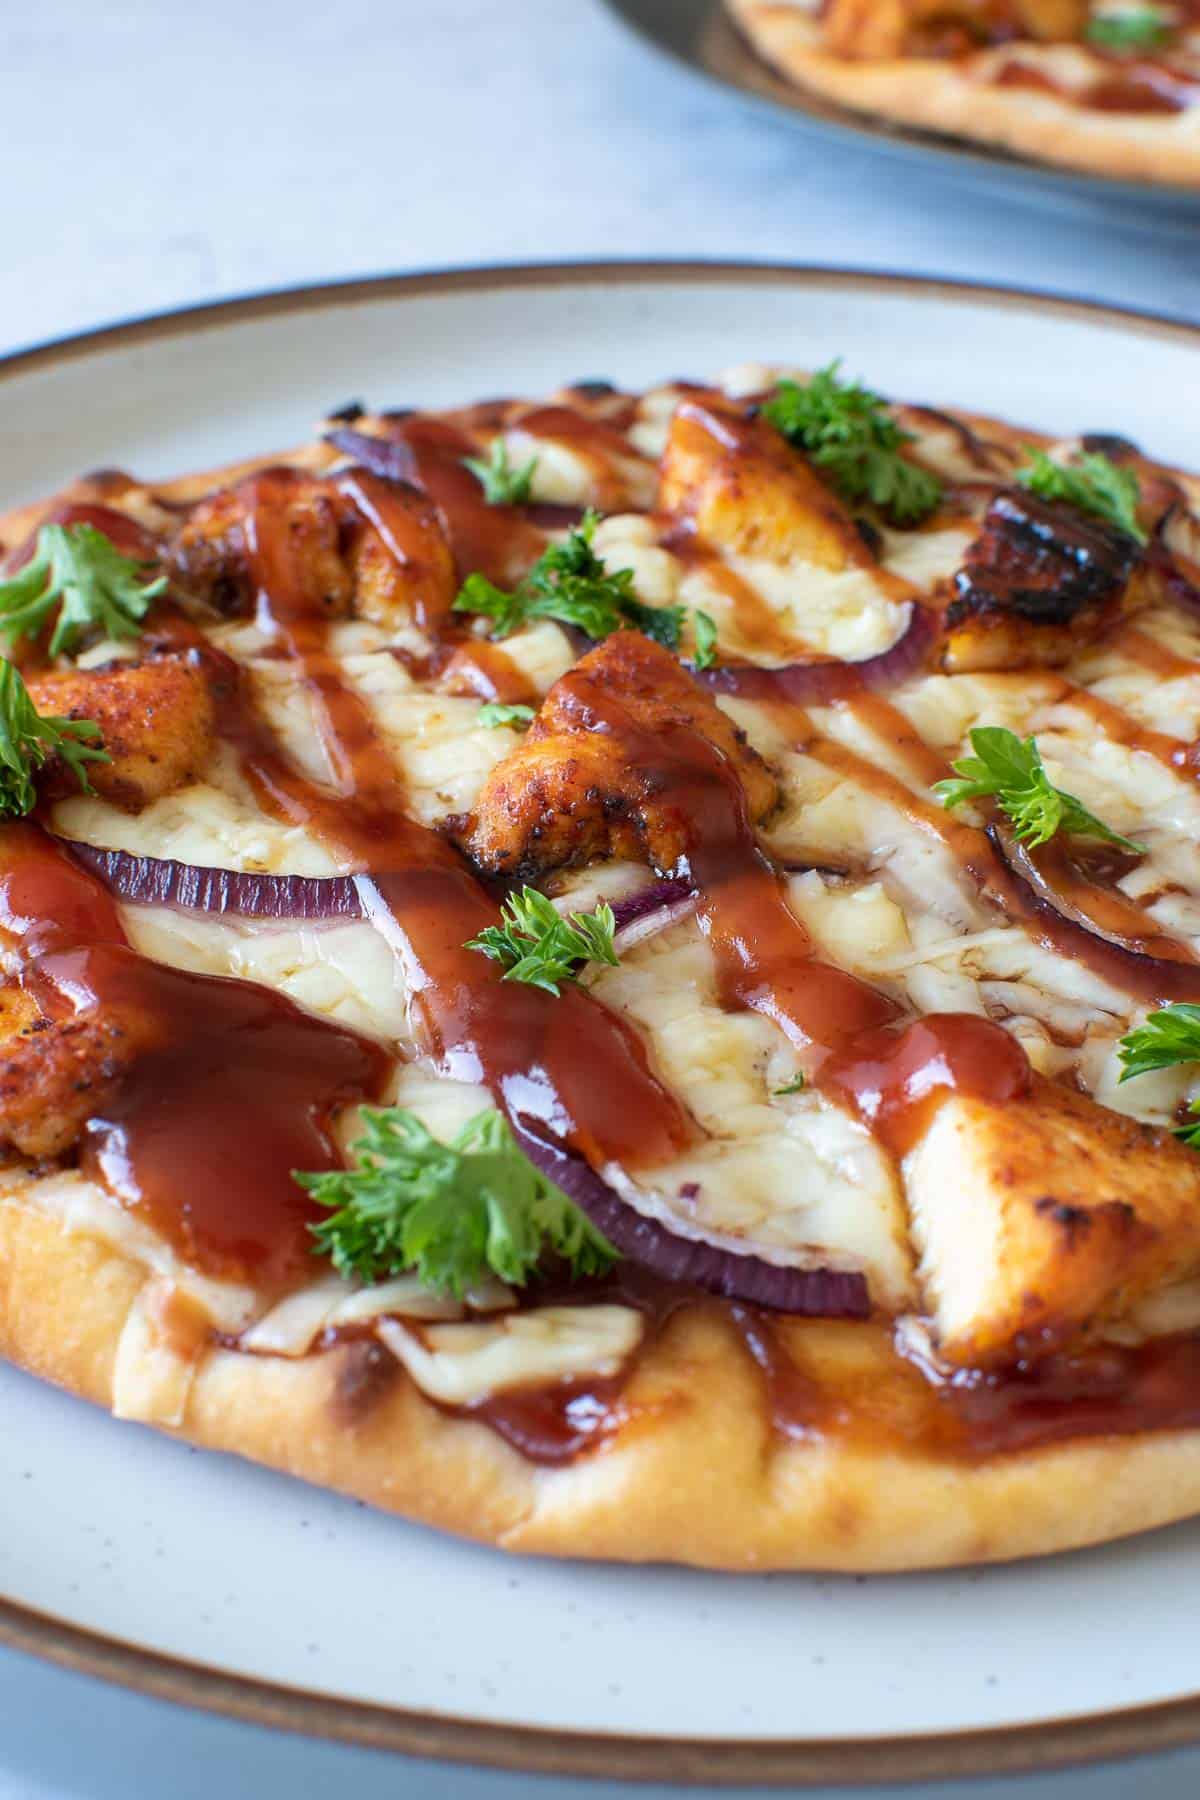 Closeup of flatbread with chicken and BBQ sauce.